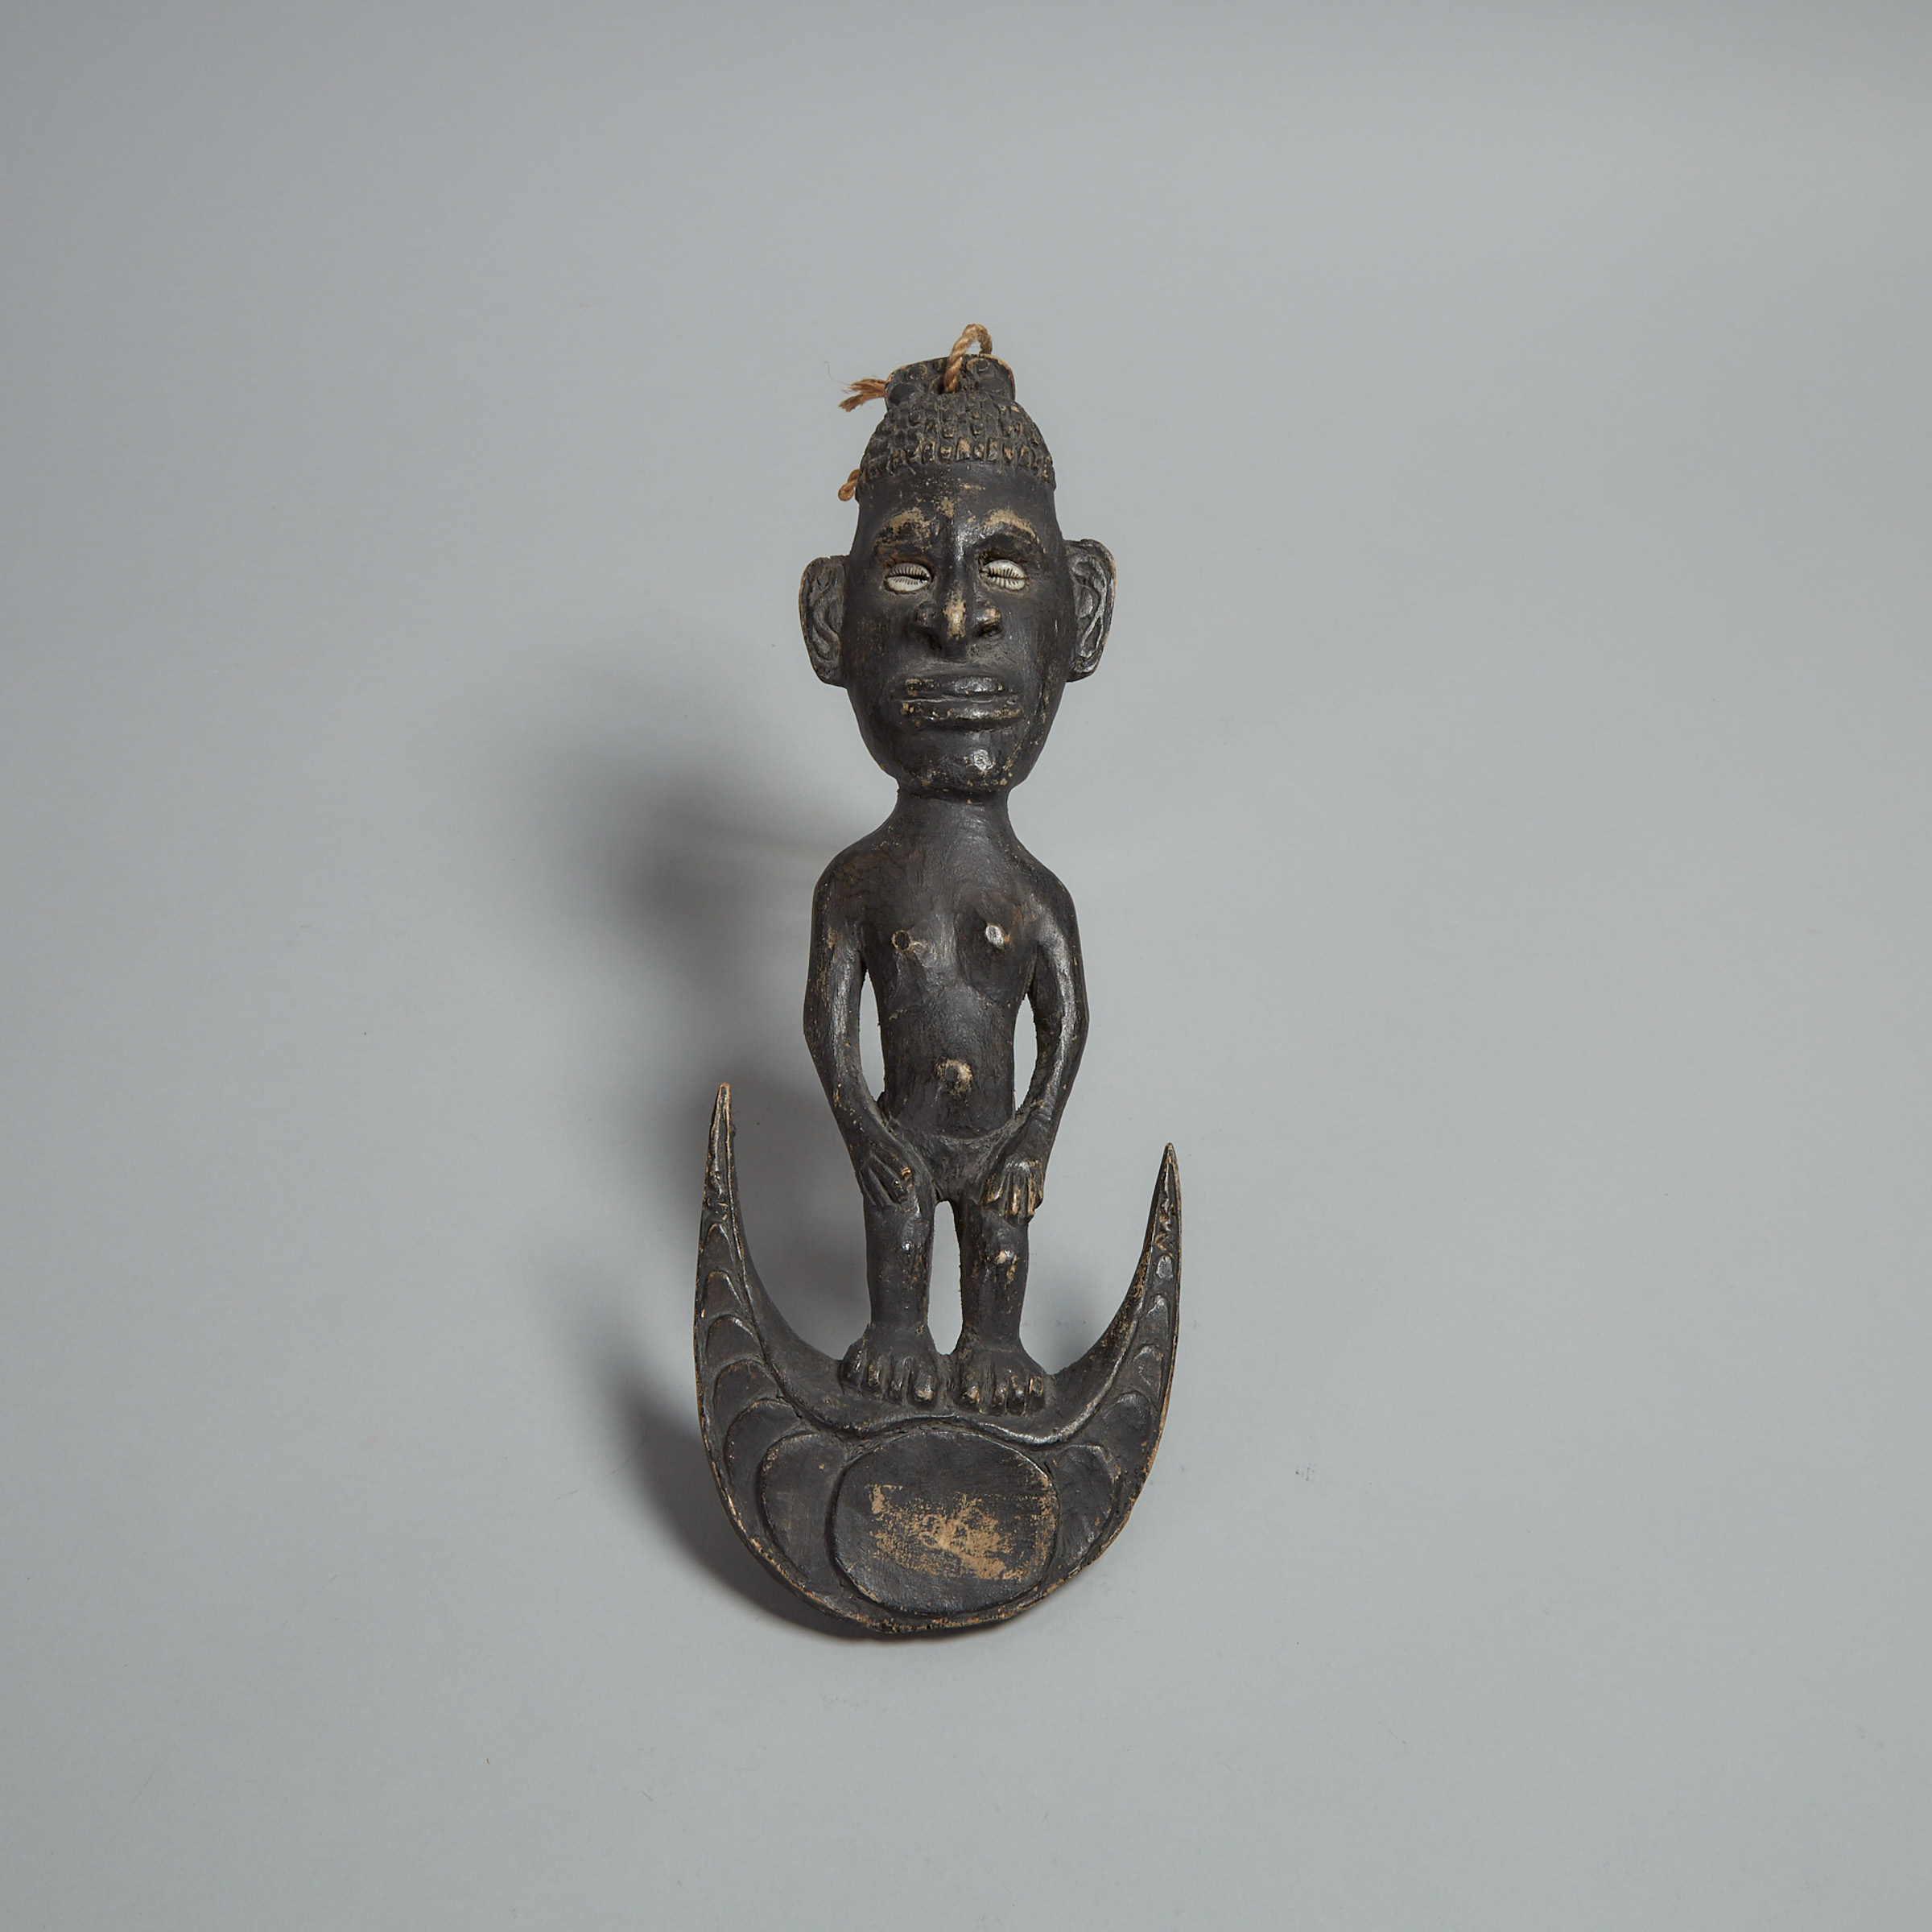 Sepik River Figural Suspension/Food Hook, Papua New Guinea, mid to late 20th century